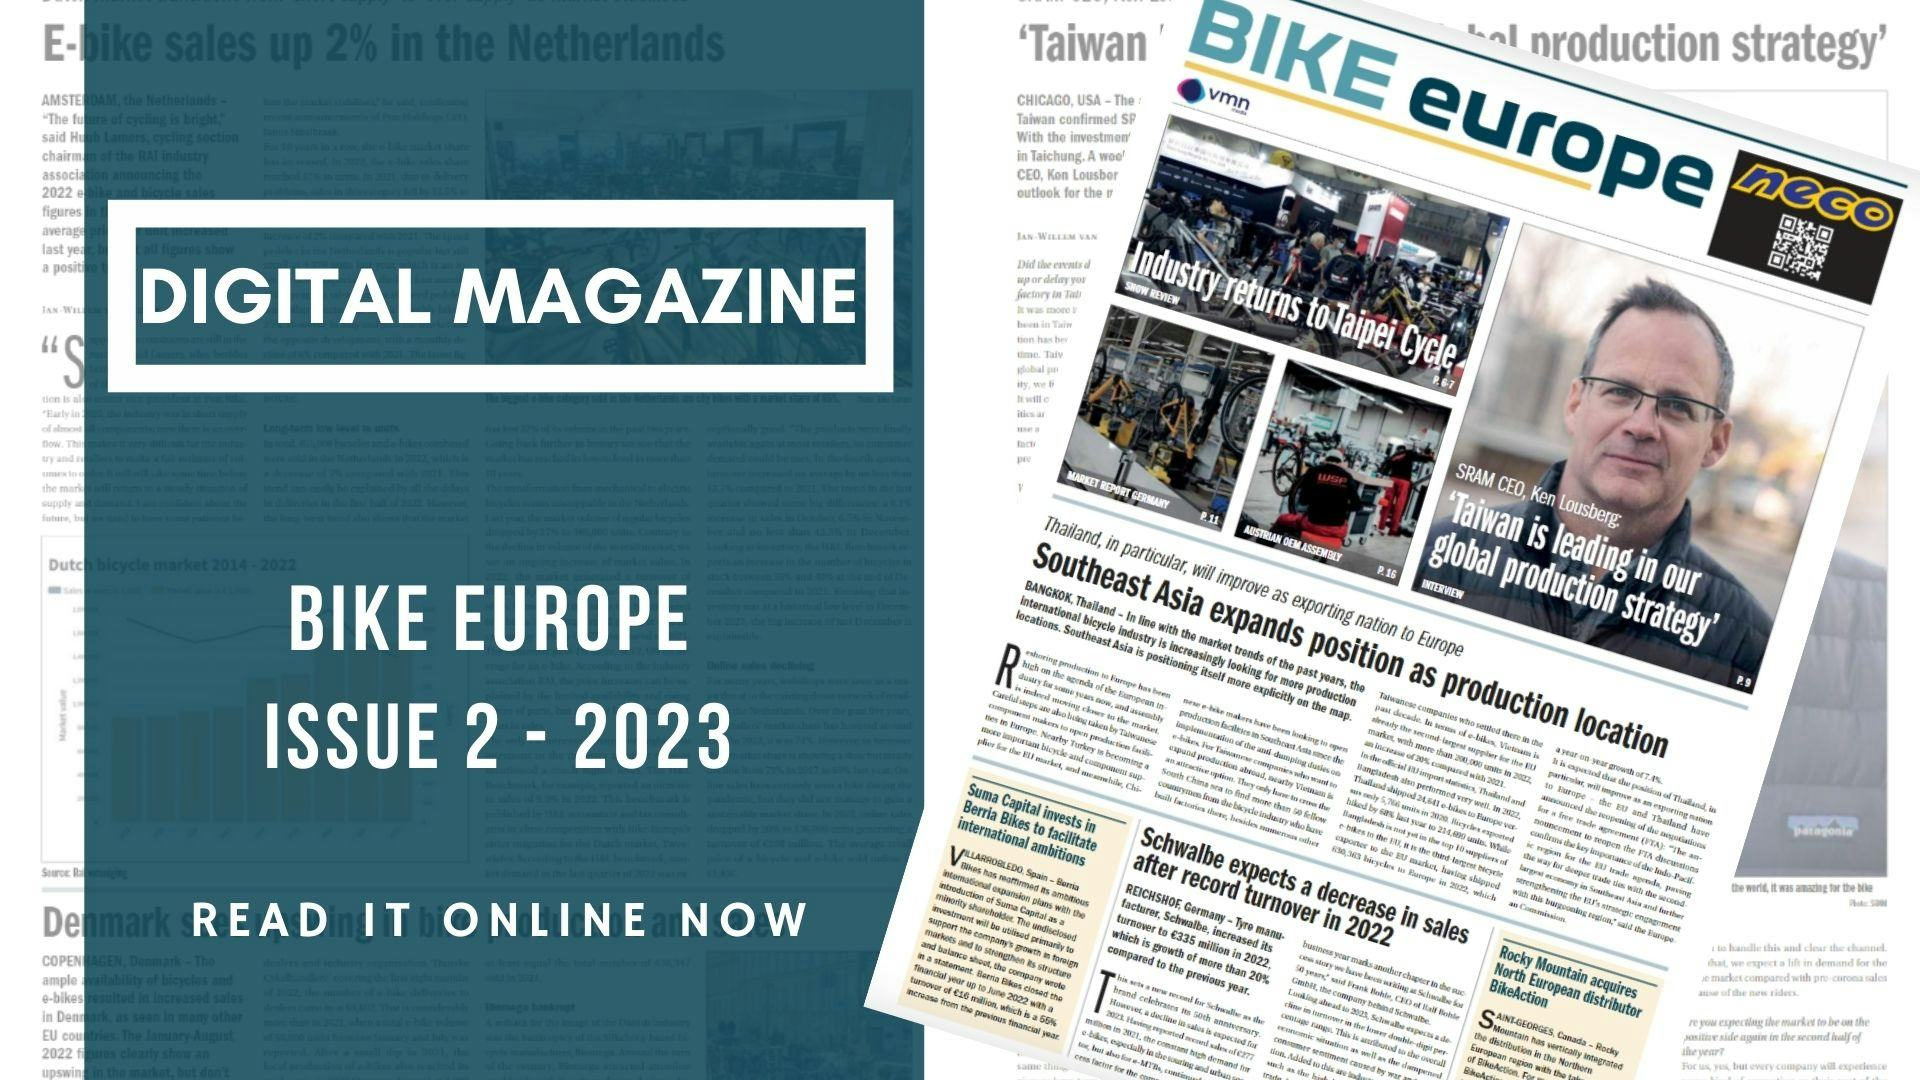 Bike Europe issue 2/2023 available online now